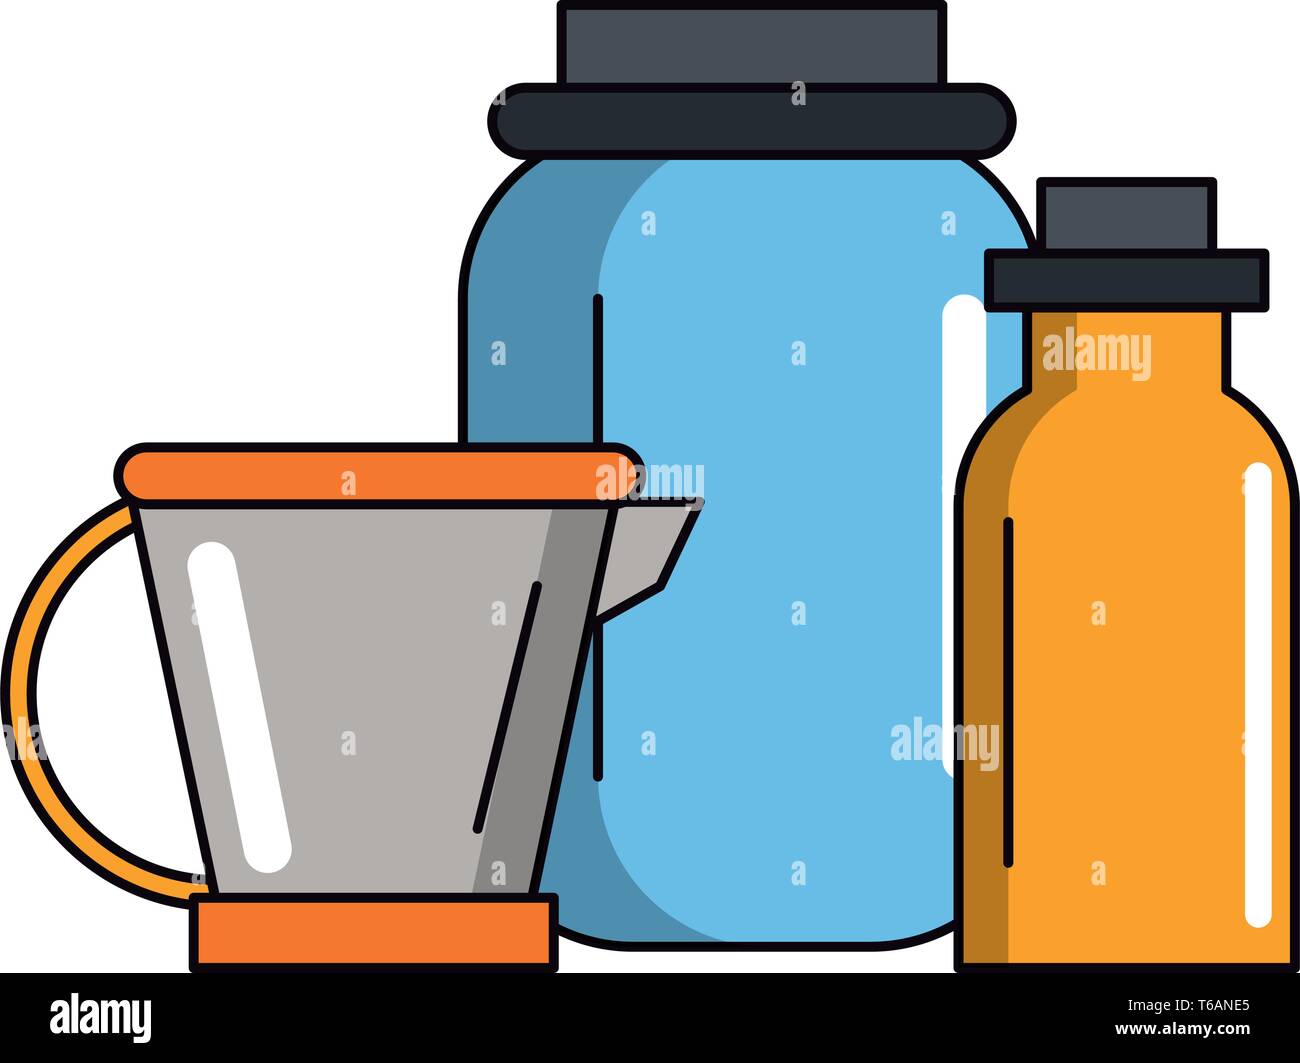 Blender Bottle Images – Browse 9,693 Stock Photos, Vectors, and Video